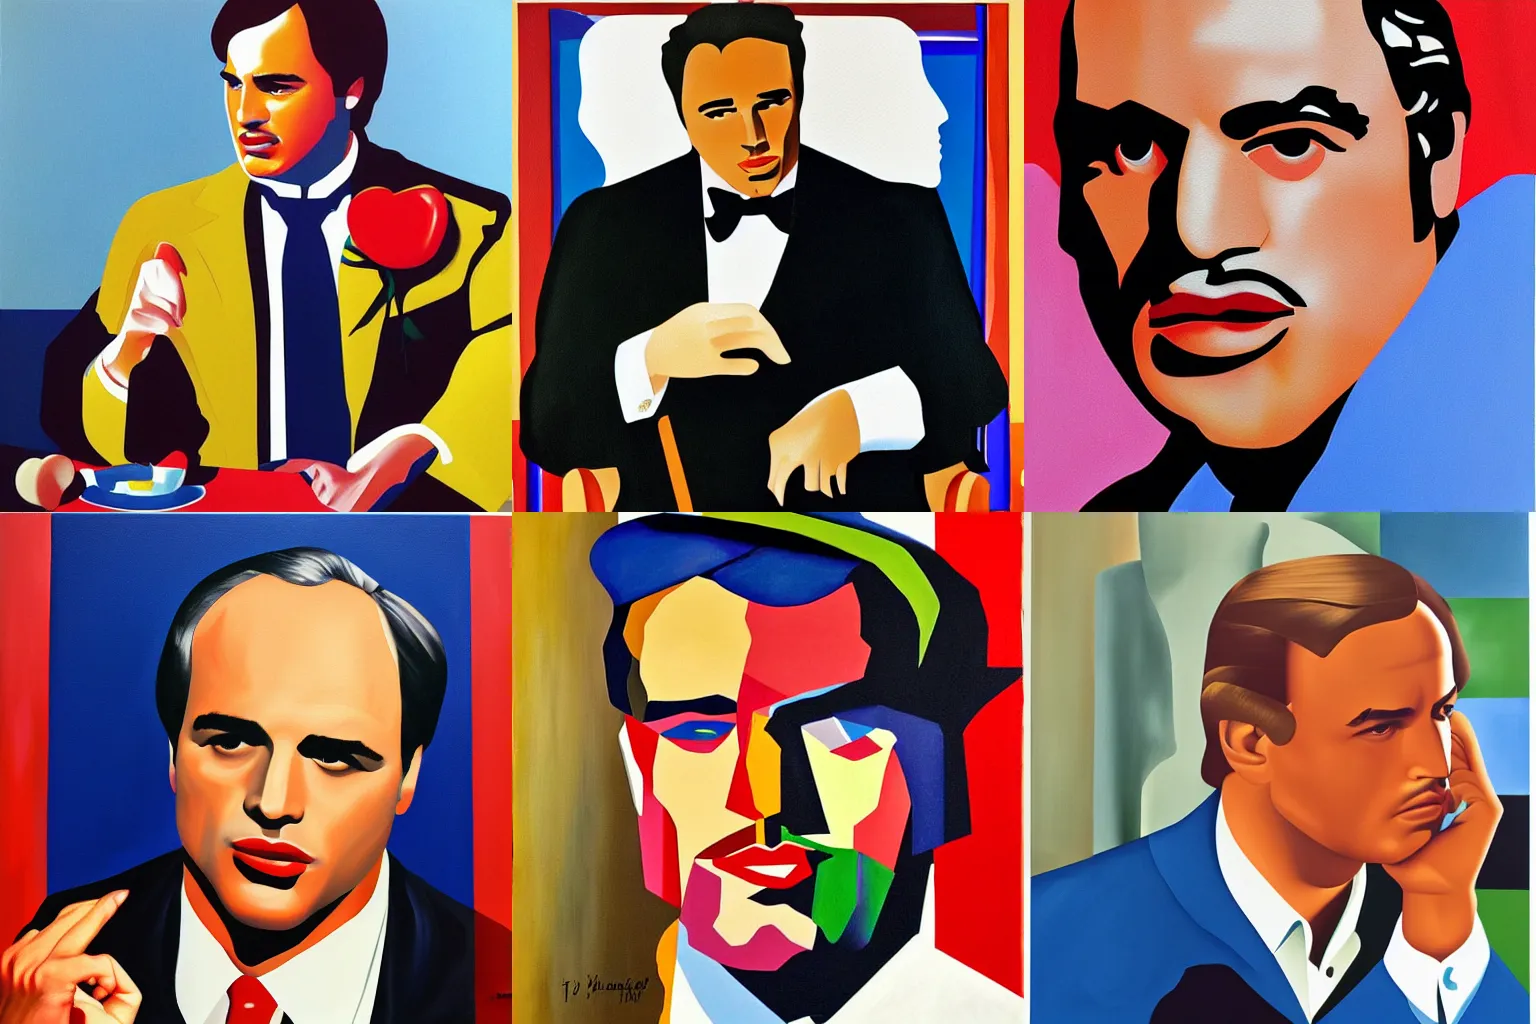 Prompt: Marlon Brando as The Godfather, painting by Tom Wesselmann